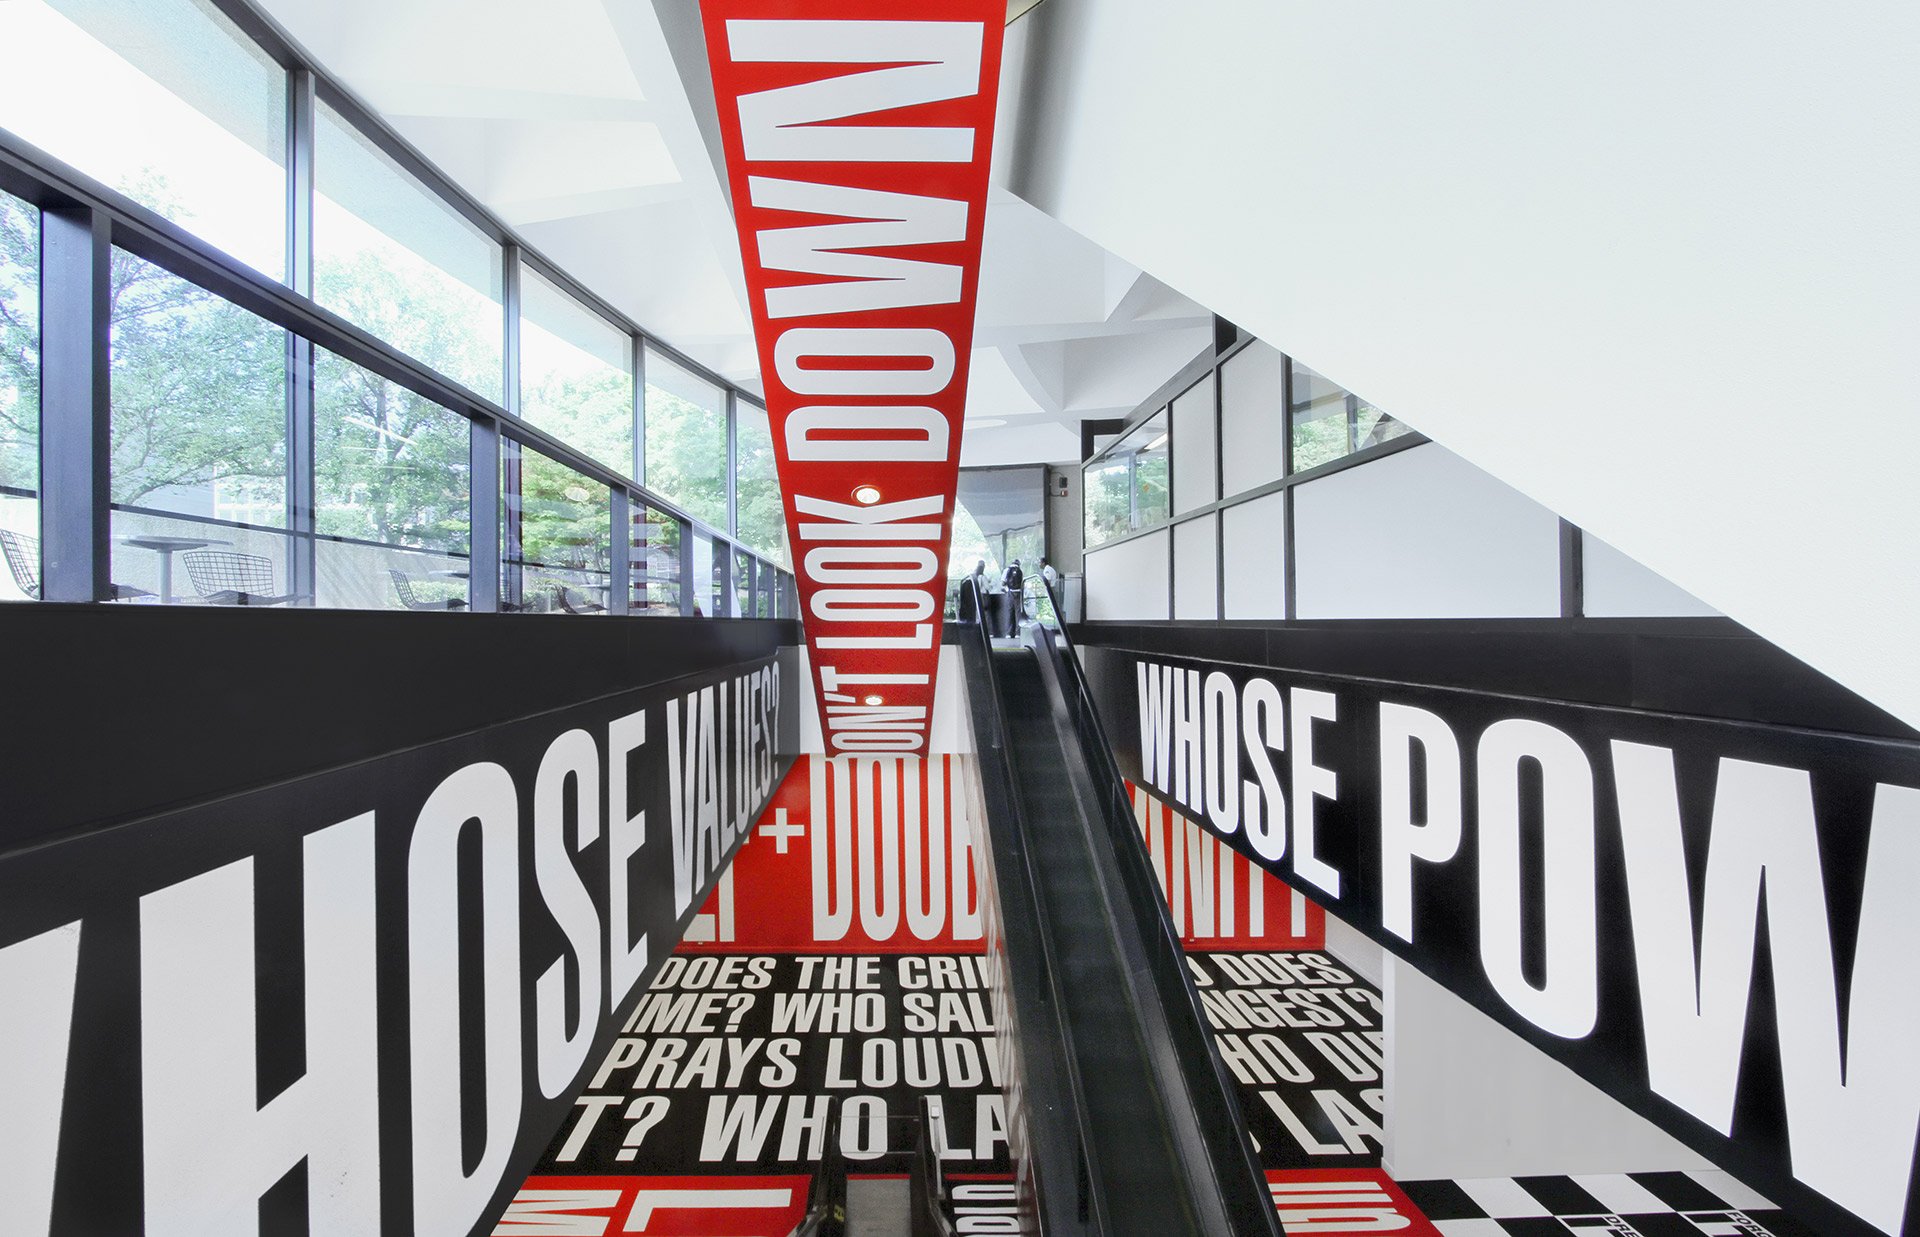 An installation view of an exhibition titled, Barbara Kruger: Belief + Doubt, at the Hirshhorn Museum and Sculpture Garden, Washington, DC, dated 2012-ongoing.